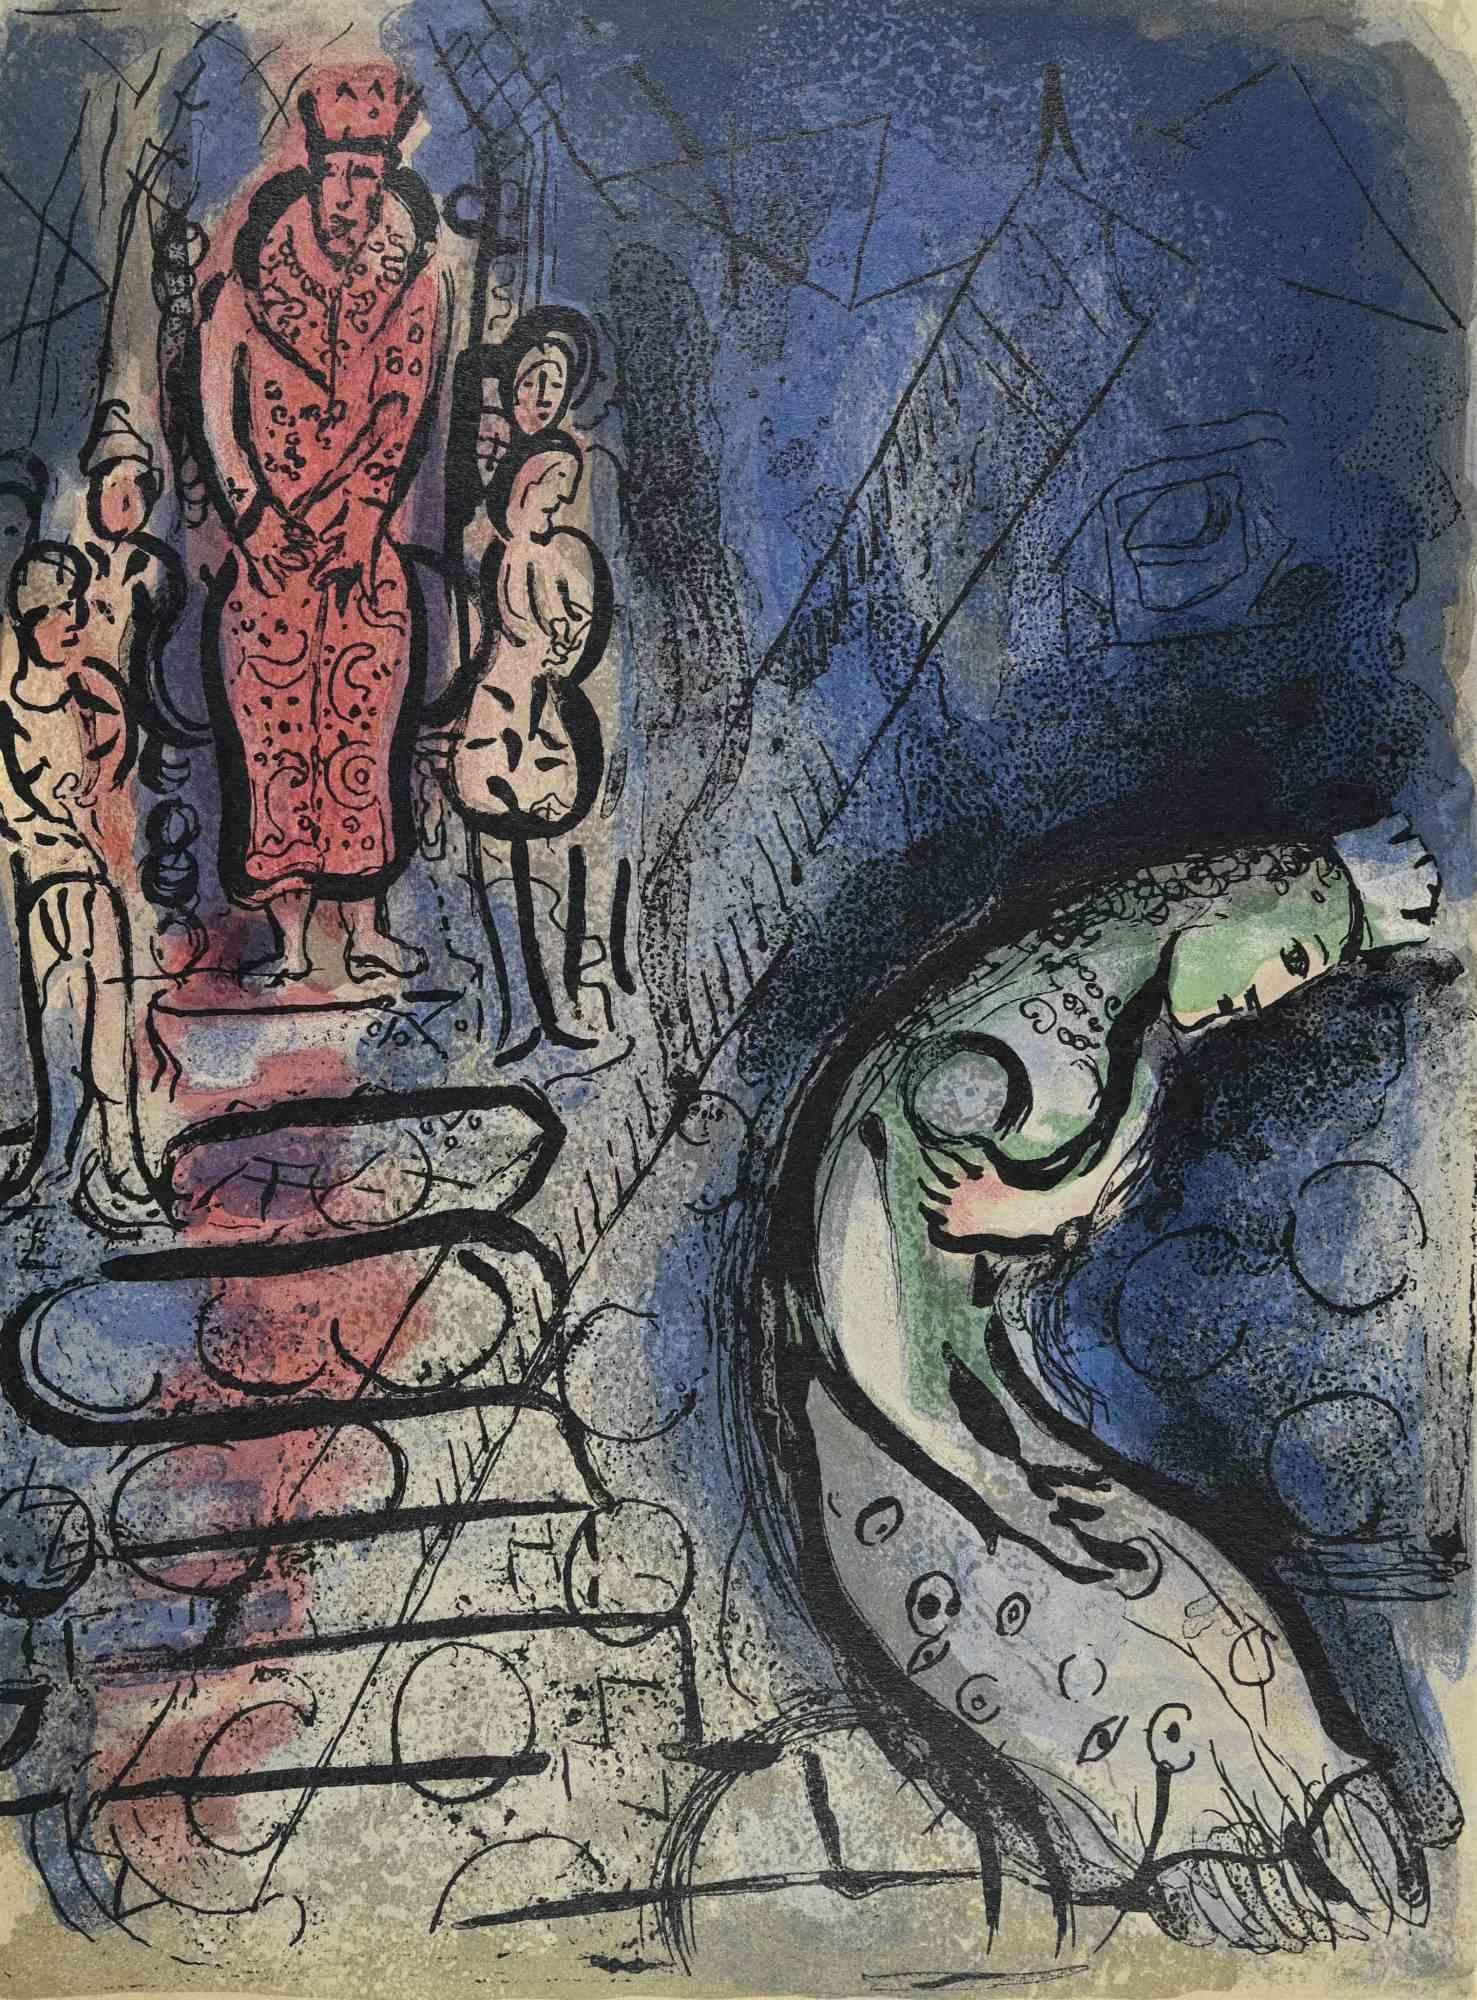 Ahasuerus sends Vasthi away  is a an artwork from the Series "The Bible", by Marc Chagall in 1960.

Mixed colored lithograph on brown-toned paper, no signature.

Edition of 6500 unsigned lithographs. Printed by Mourlot and published by Tériade,